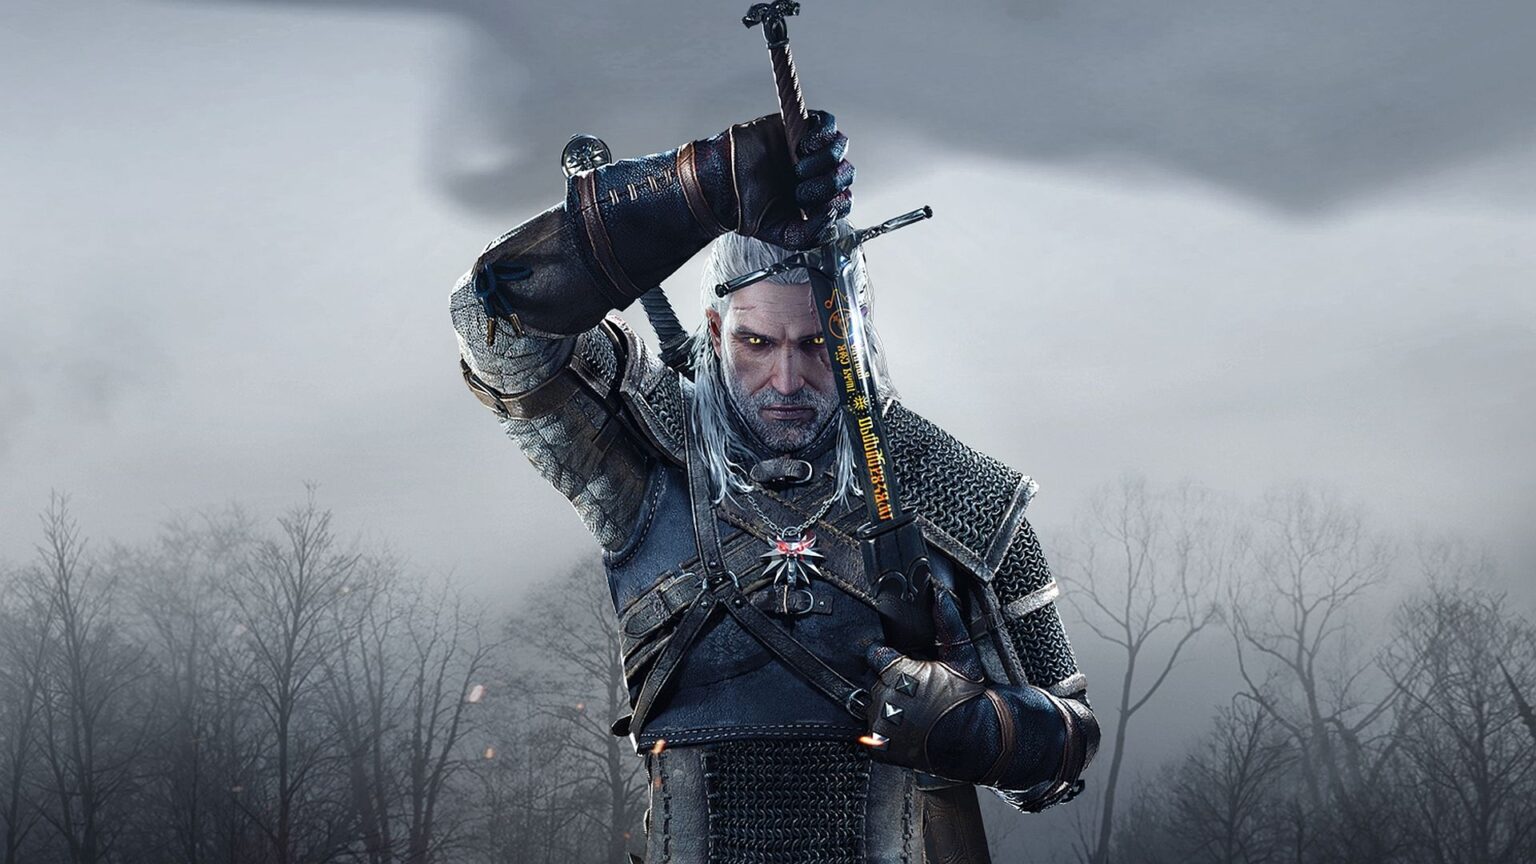 throw a bomb in witcher 3 pc